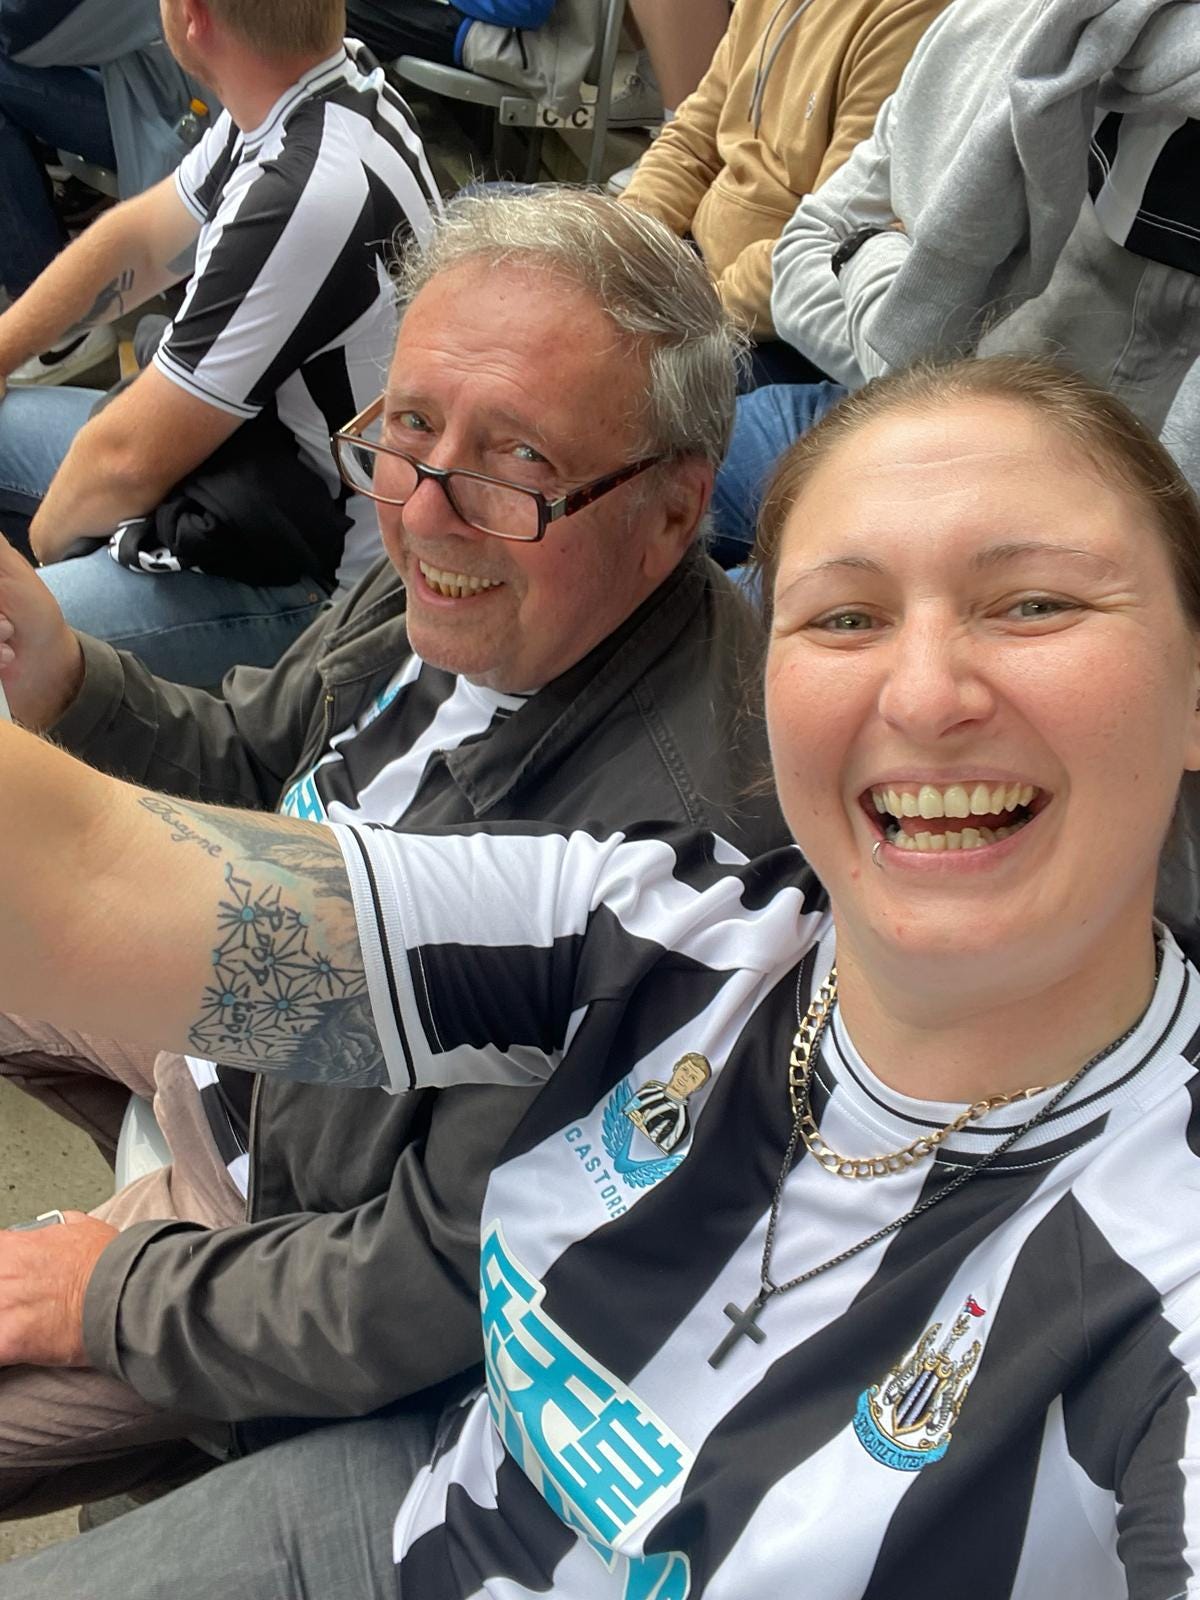 The woman banned from Newcastle United stadium for tweeting about gender ideology